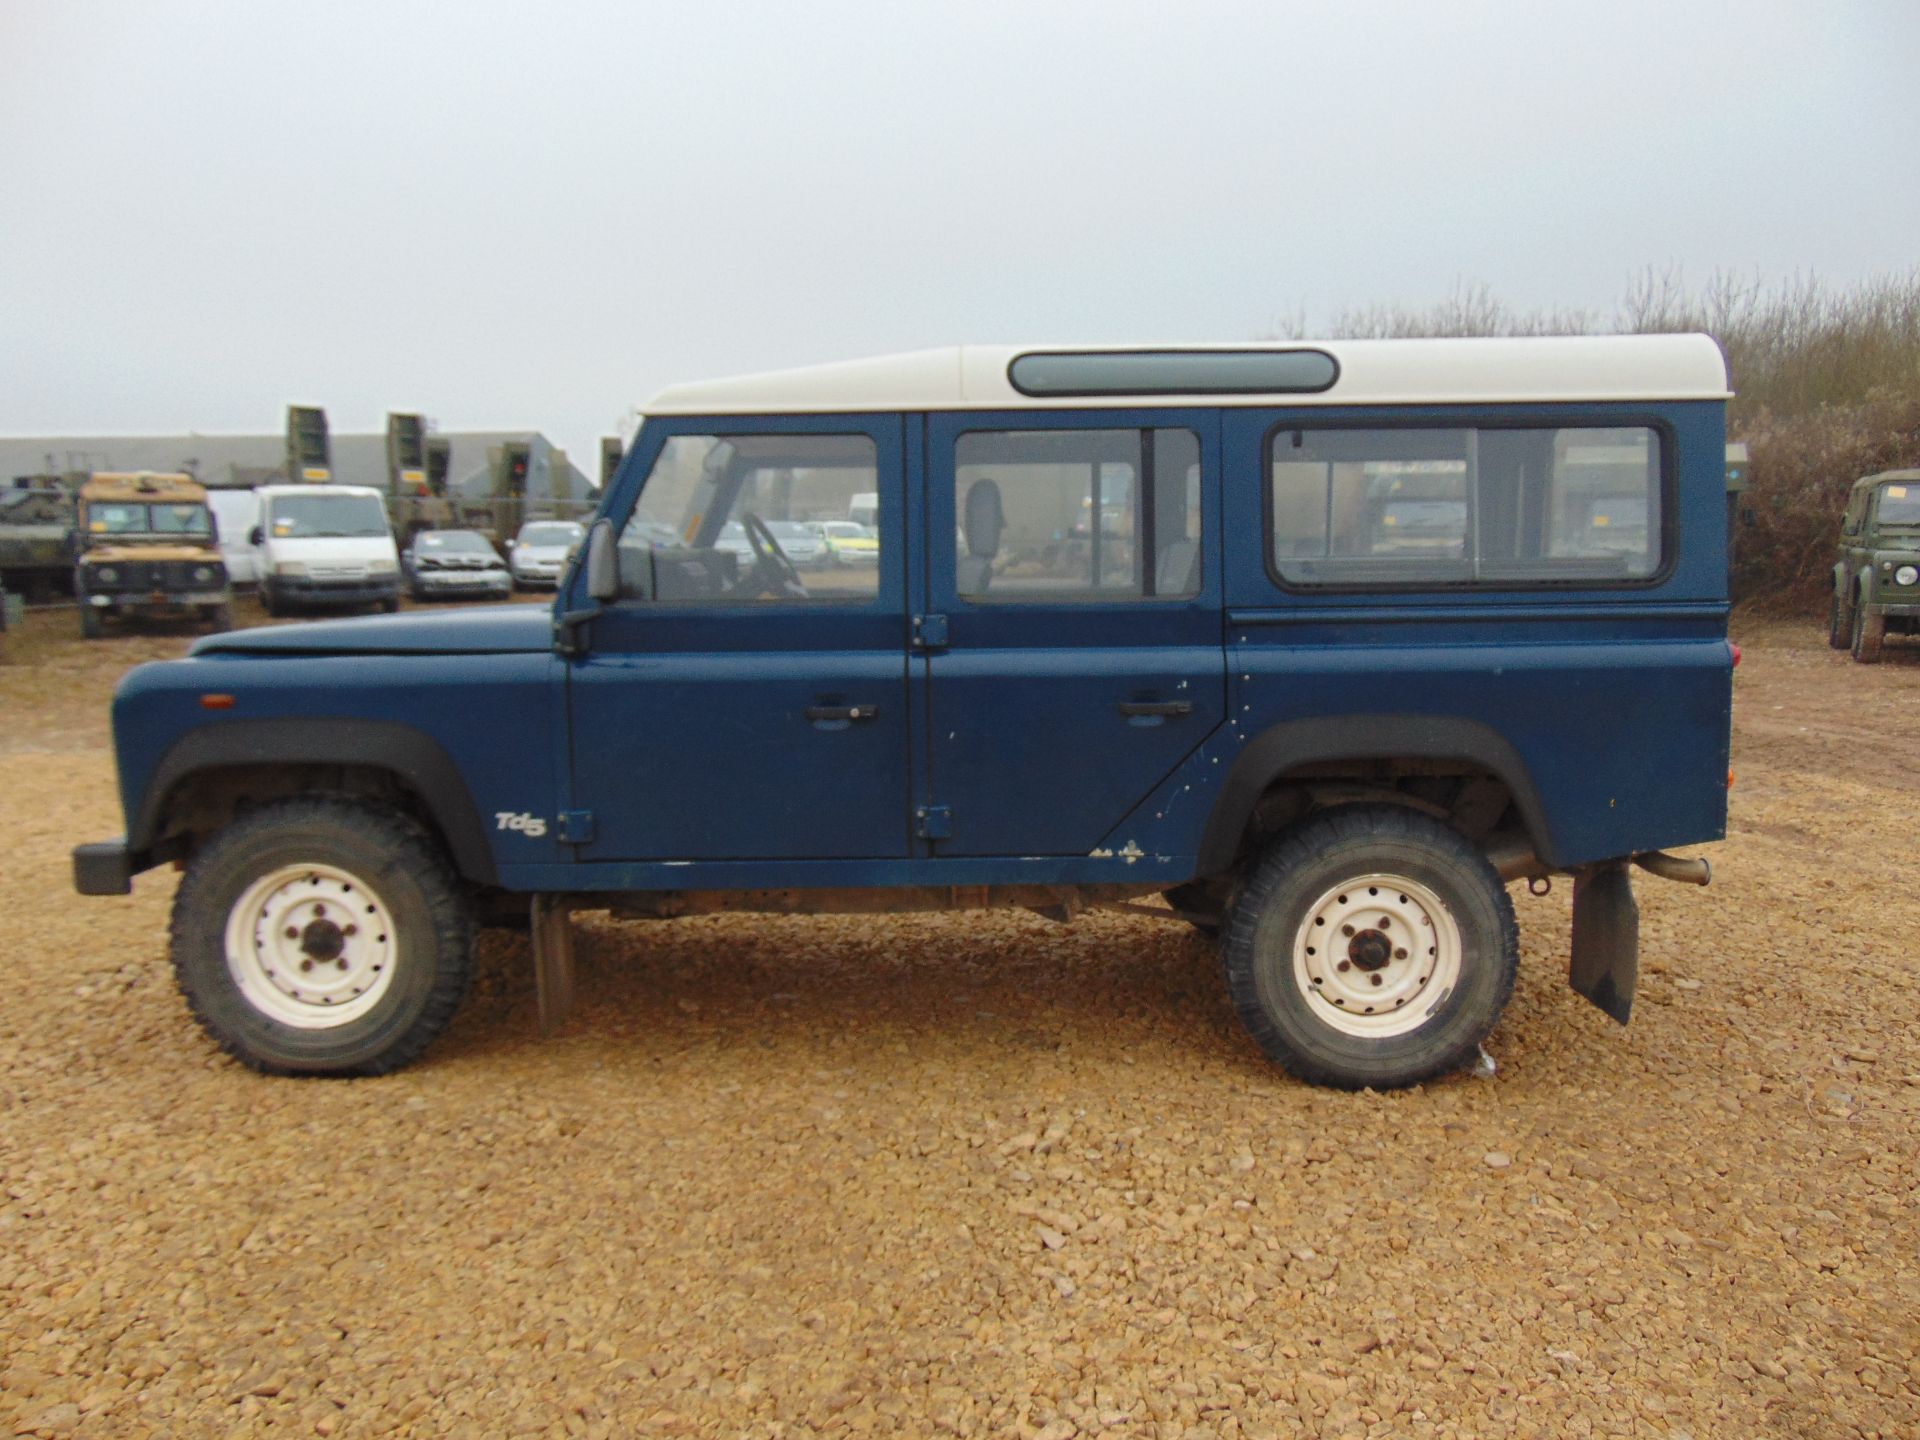 2002 Land Rover 110 TD5 Station Wagon - Image 4 of 20